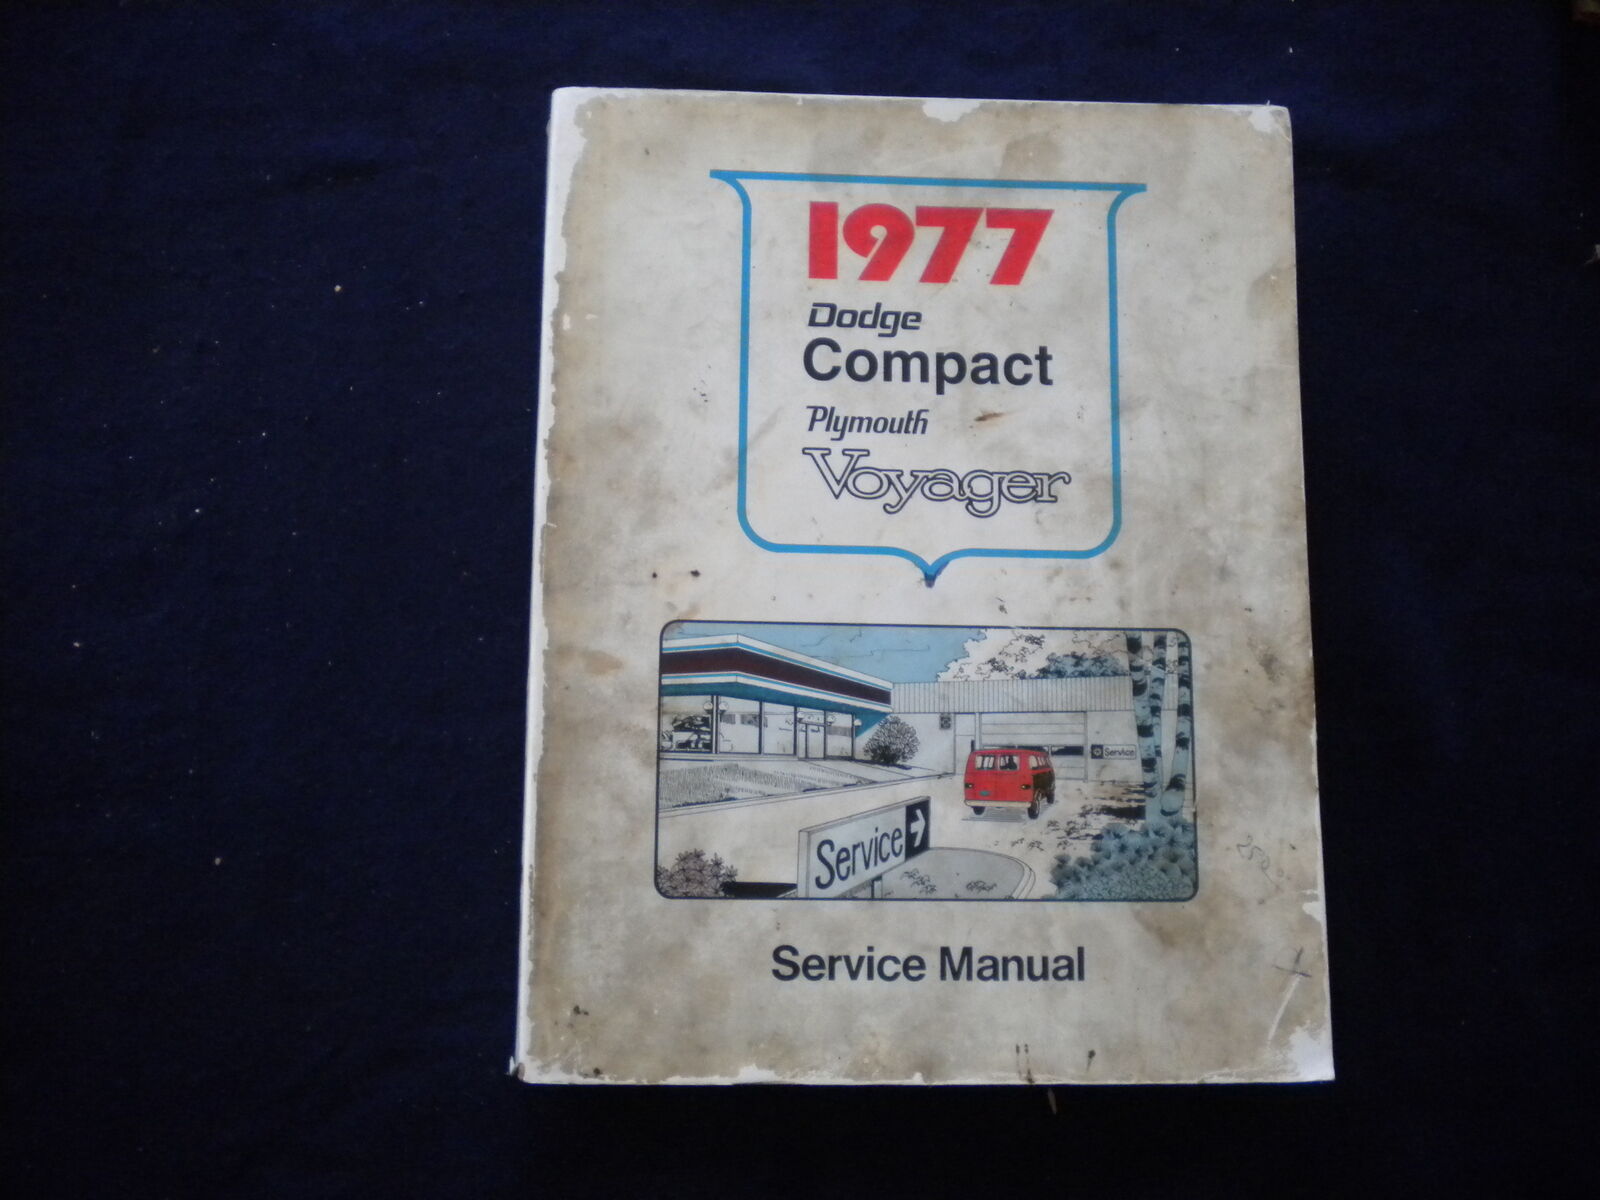 1977 DODGE COMPACT - PLYMOUTH VOYAGER SERVICE MANUAL - SOFTCOVER - KD 8012